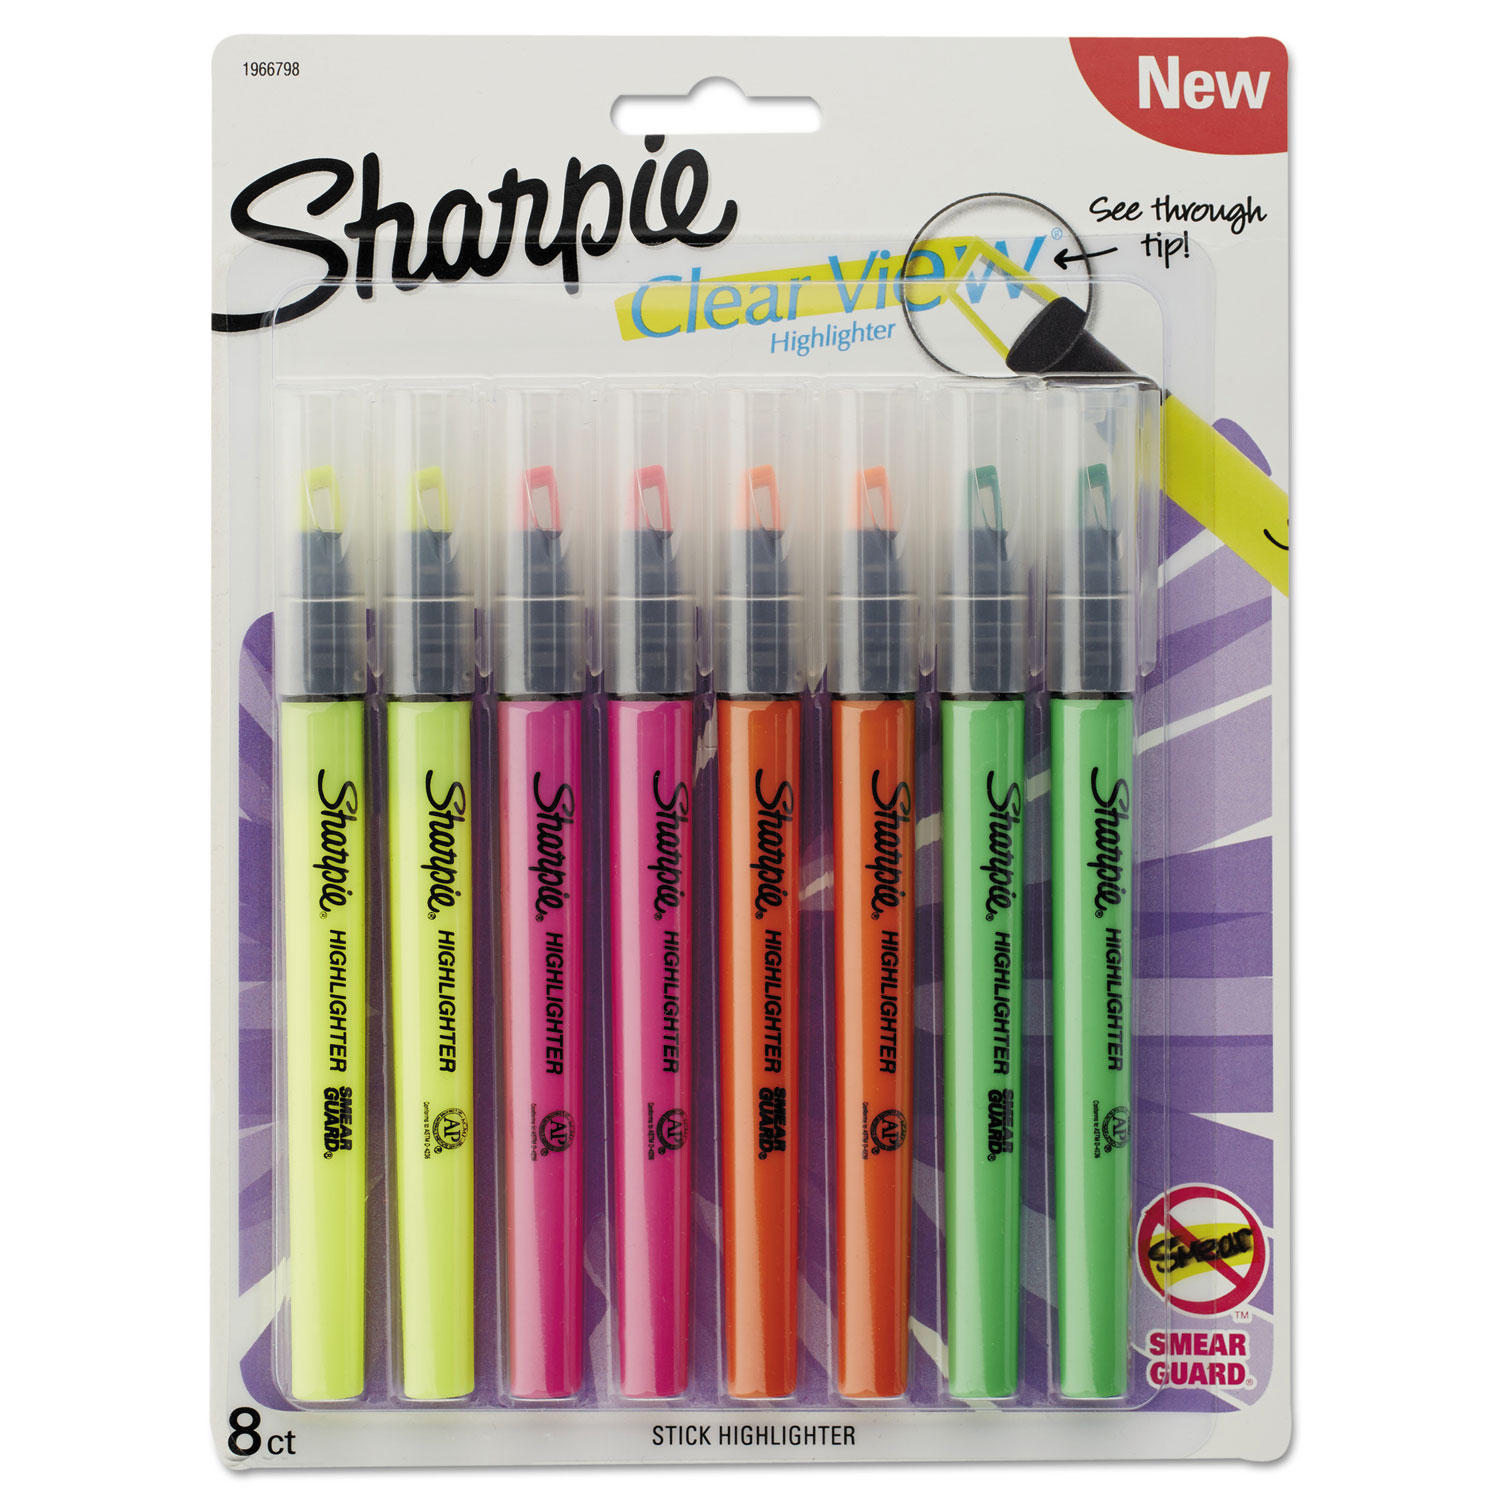  Sharpie 1966798 Clearview Pen-Style Highlighter, Chisel Tip, Assorted Colors, 8/Pack (SAN1966798) 